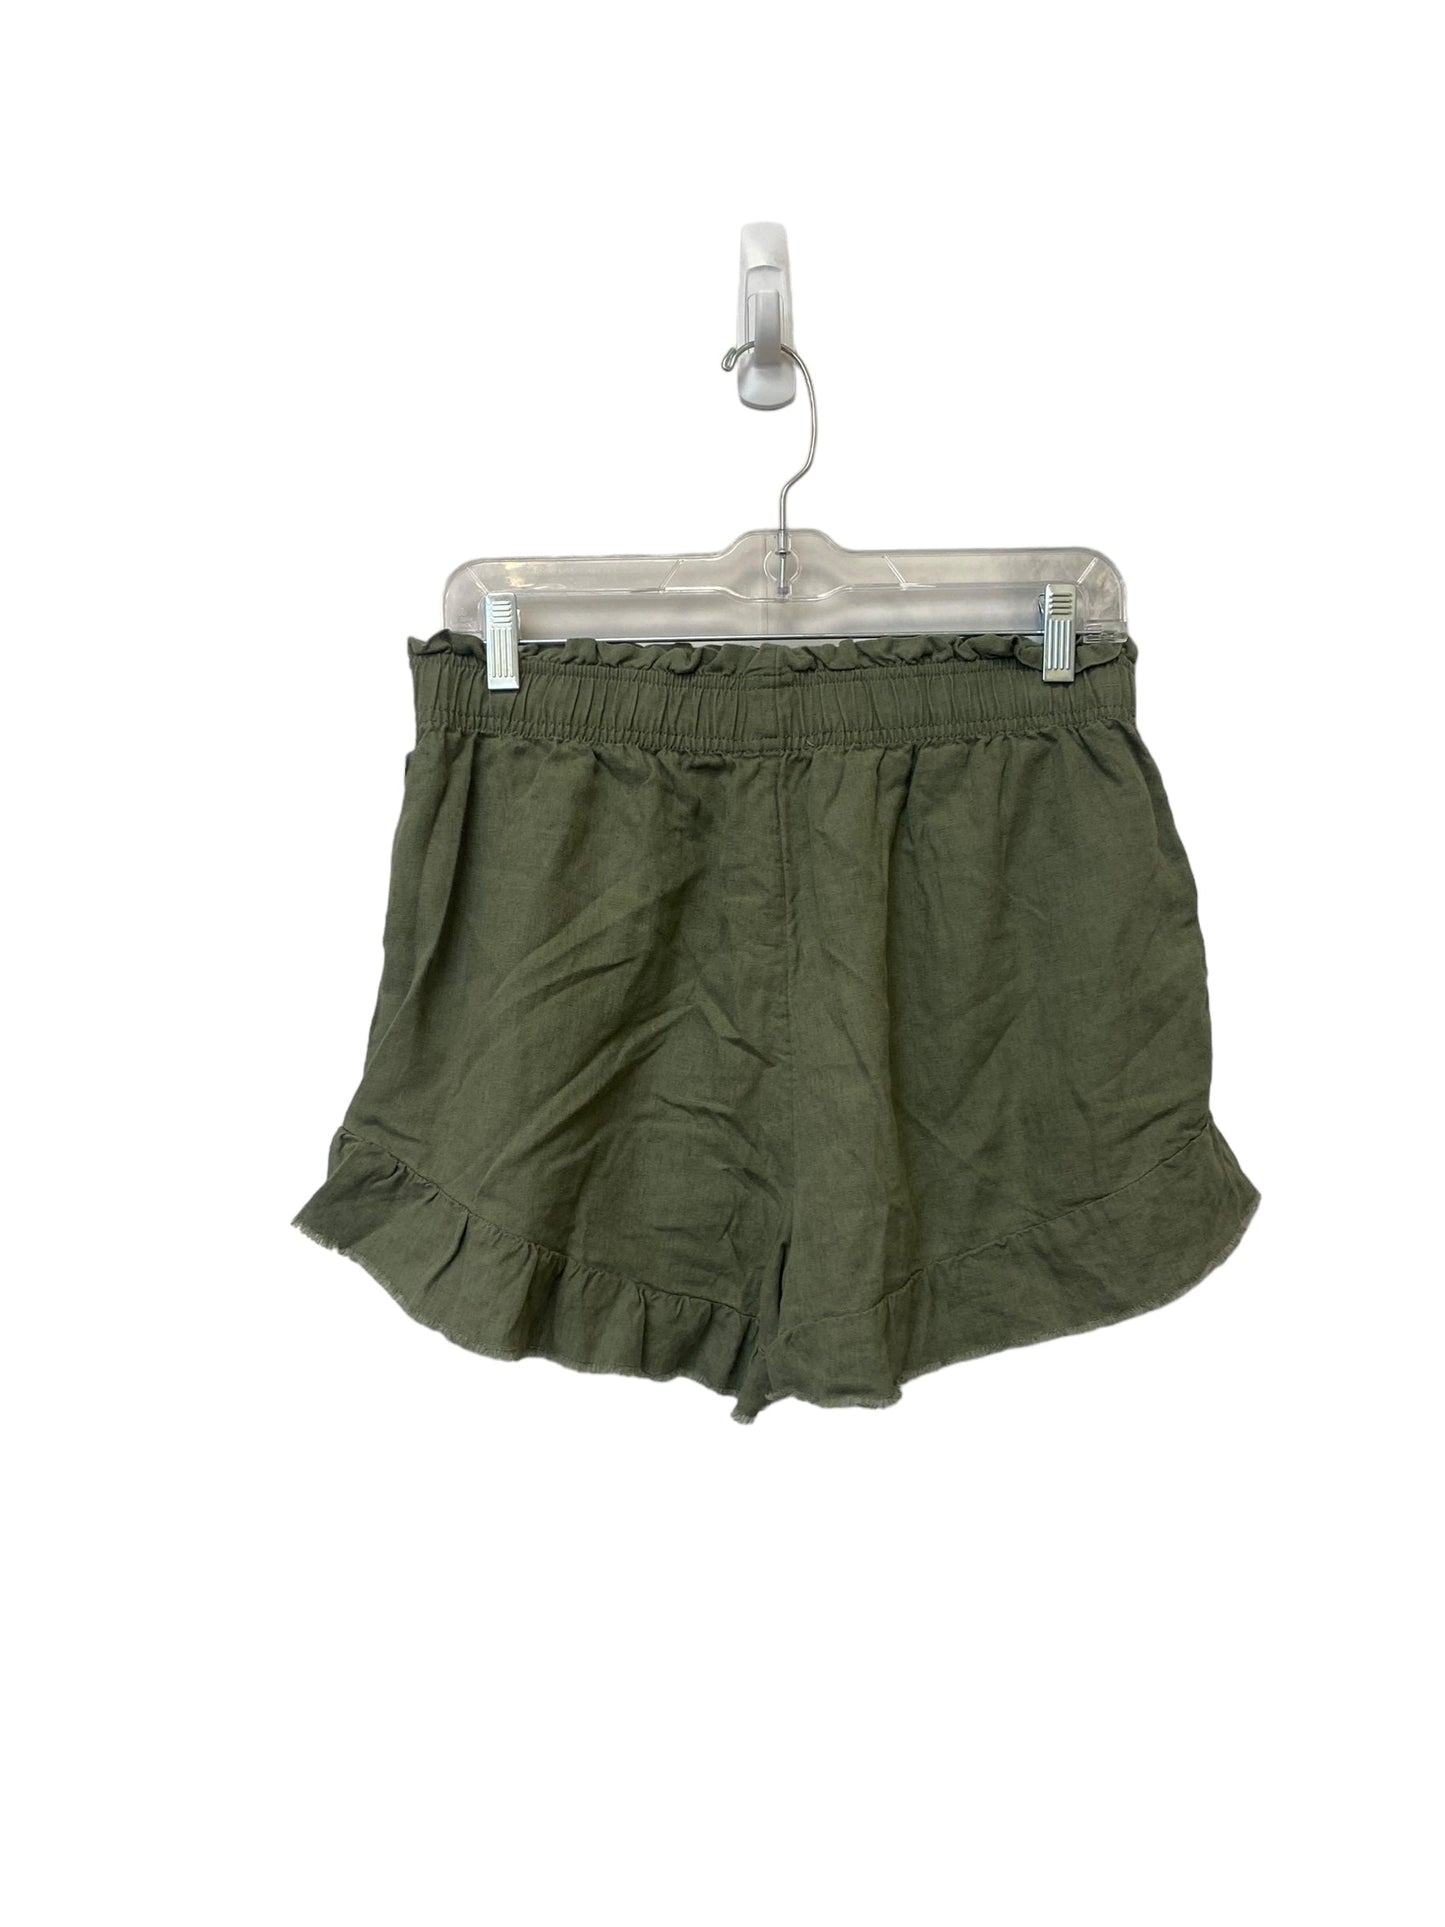 Green Shorts Aerie, Size M